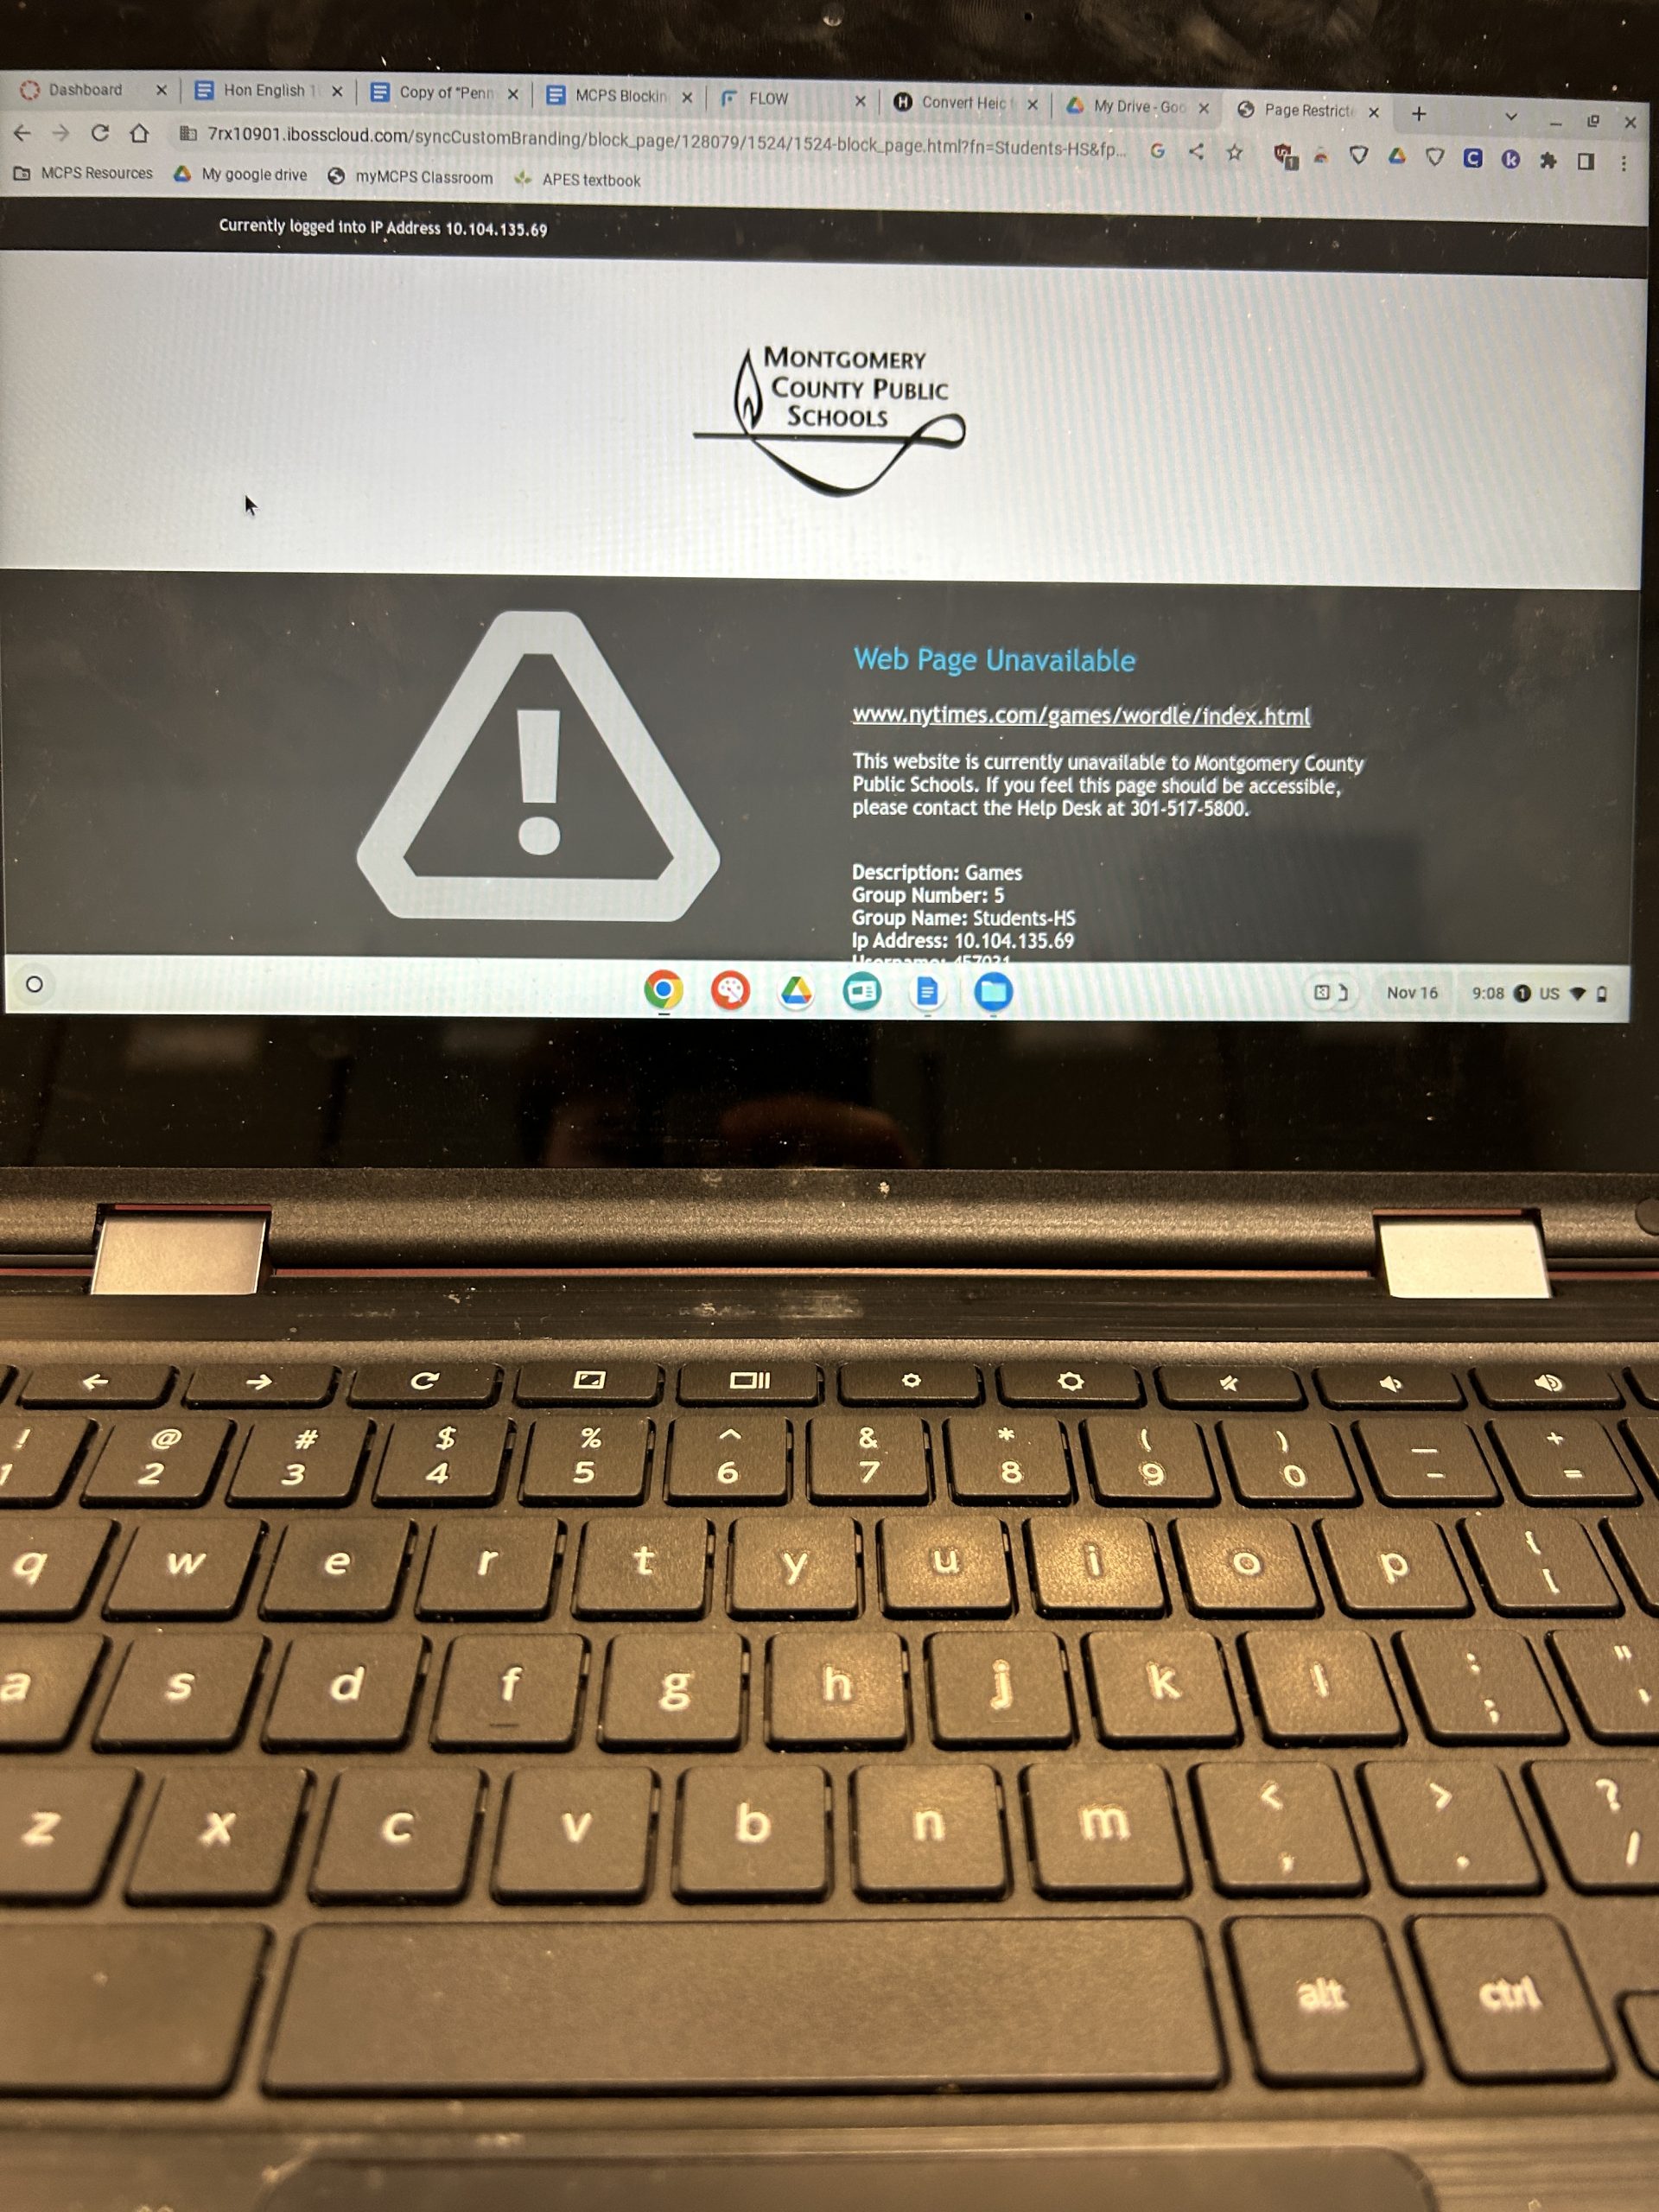 Websites are unavailable on an MCPS-issued Chromebook after being blocked.